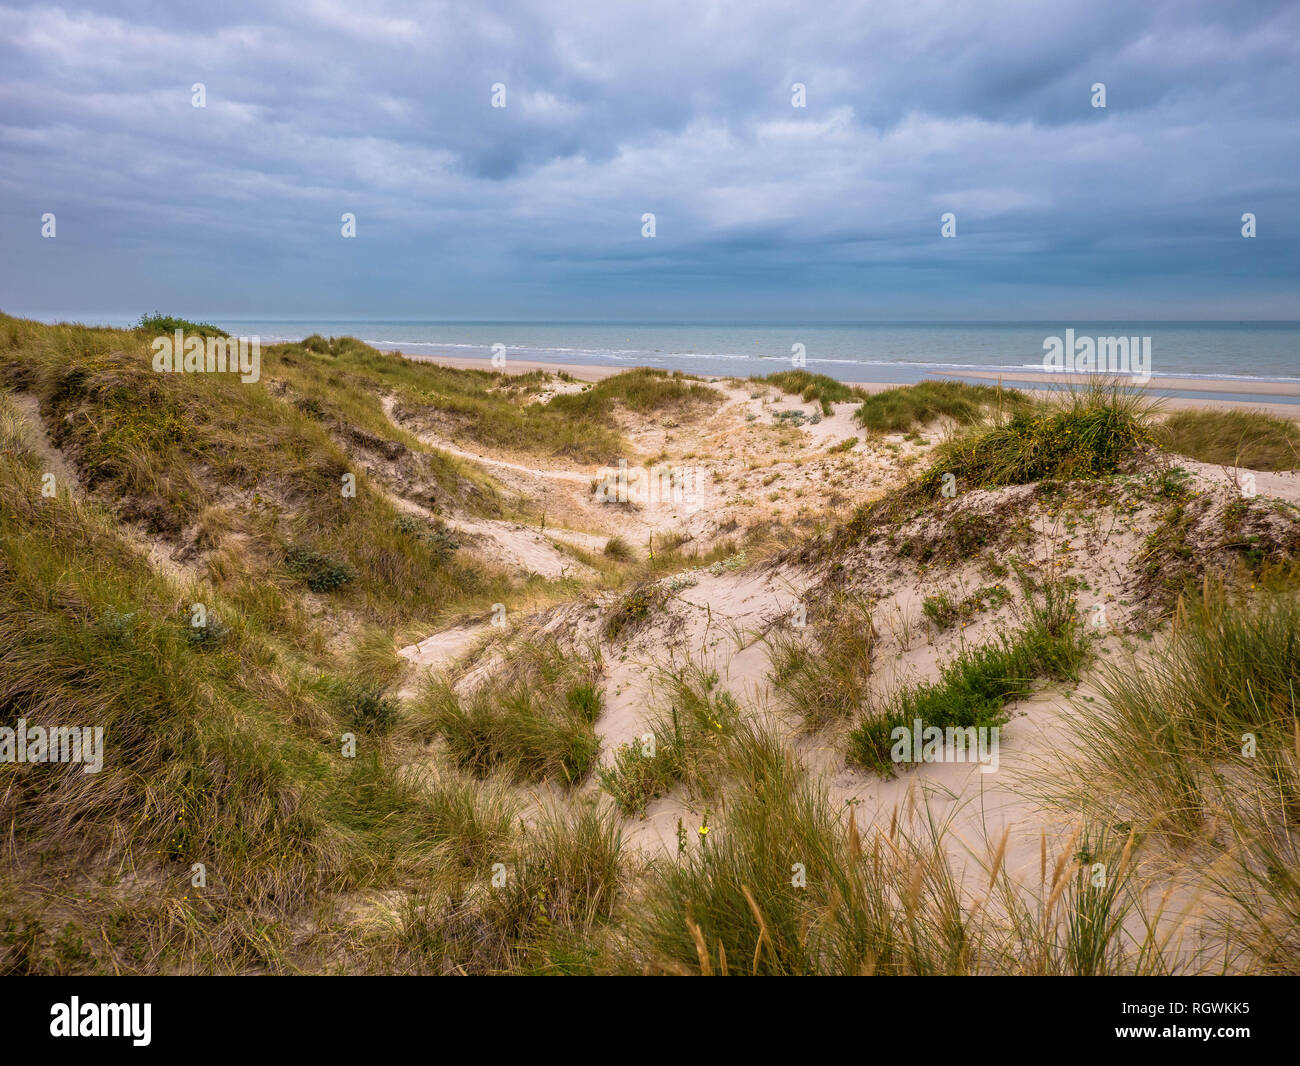 Dunes with marram grass at the beach with view towards the North Sea Stock Photo